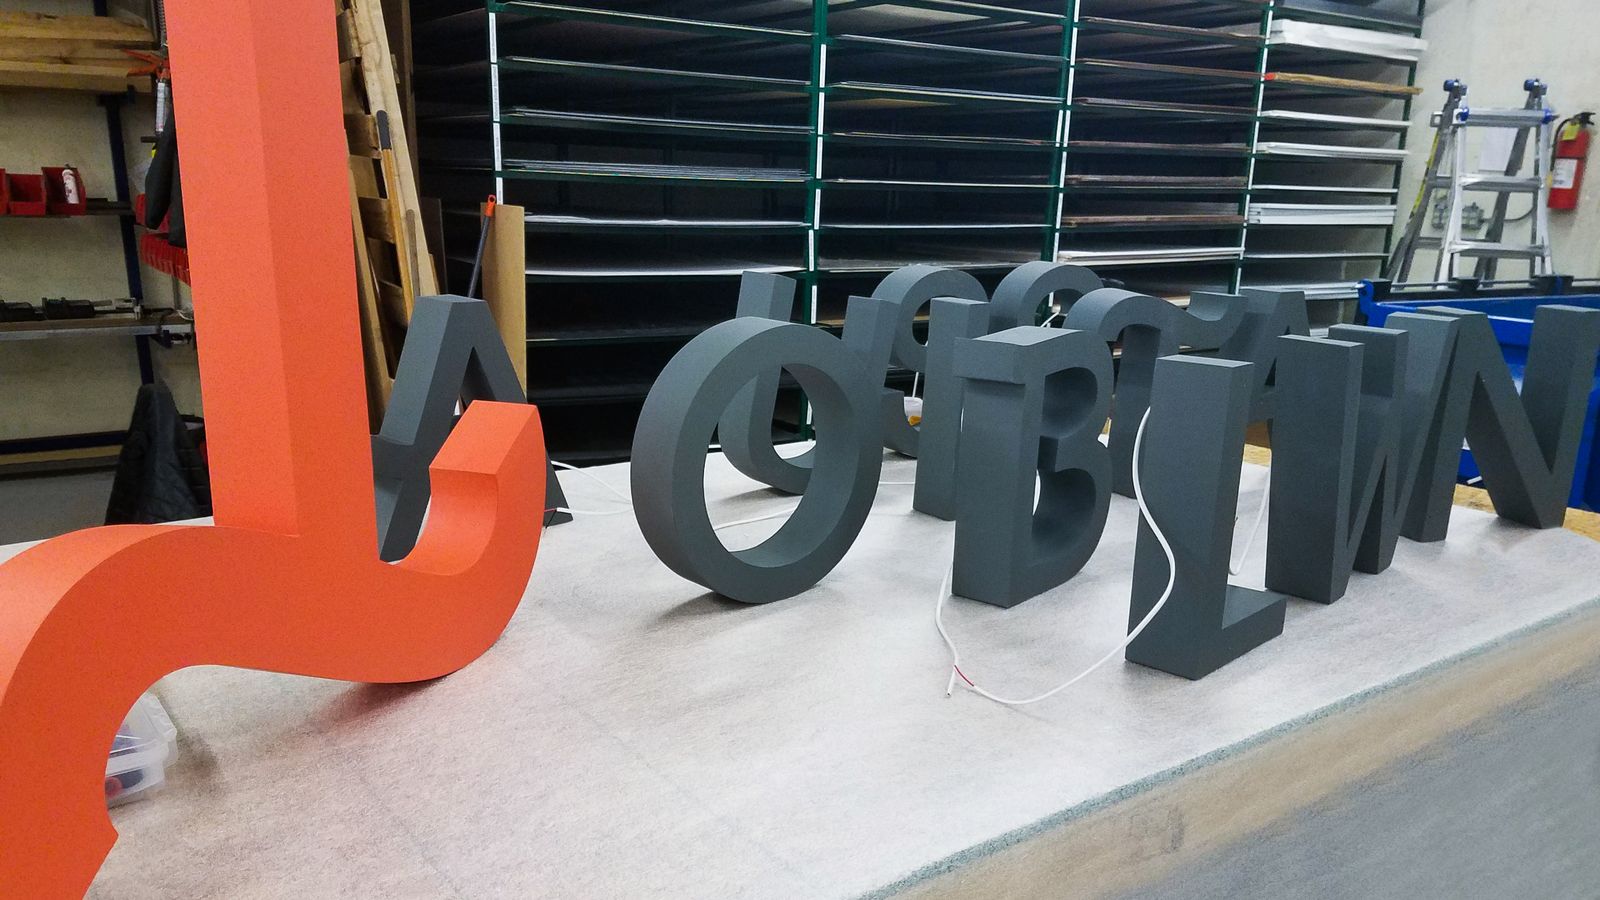 Reverse letters fabrication